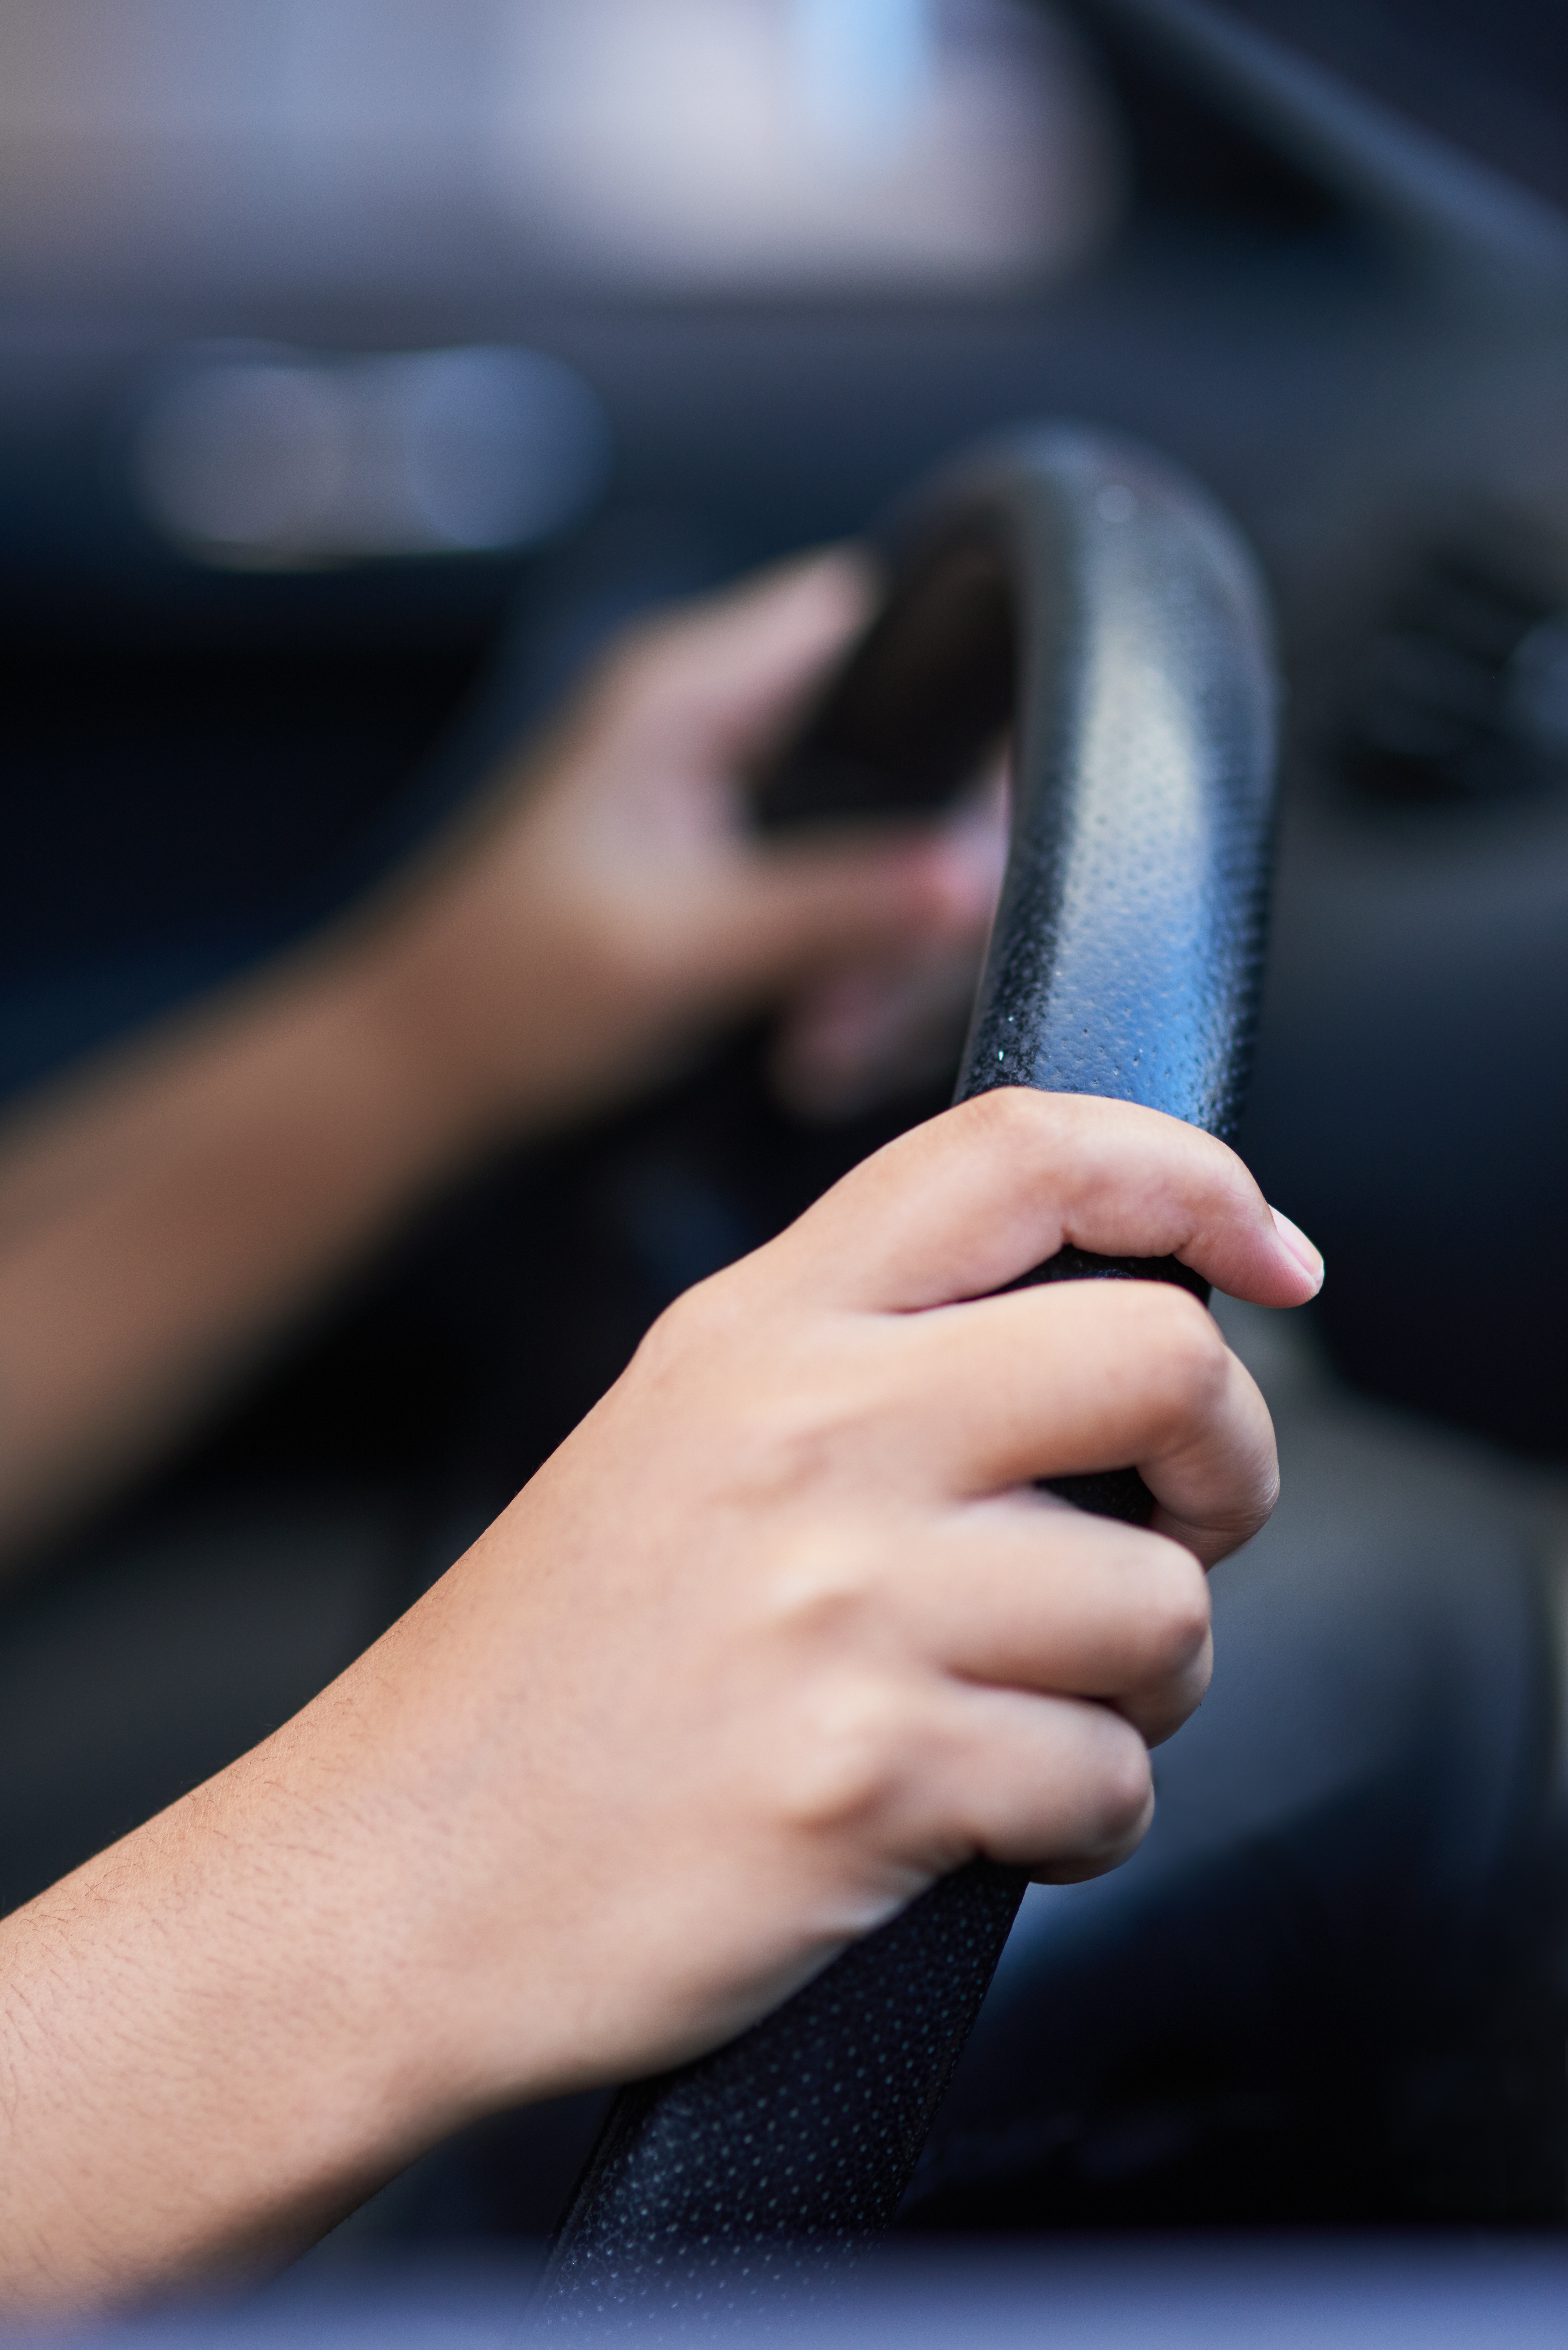 Steering in the right direction | Source: Shutterstock